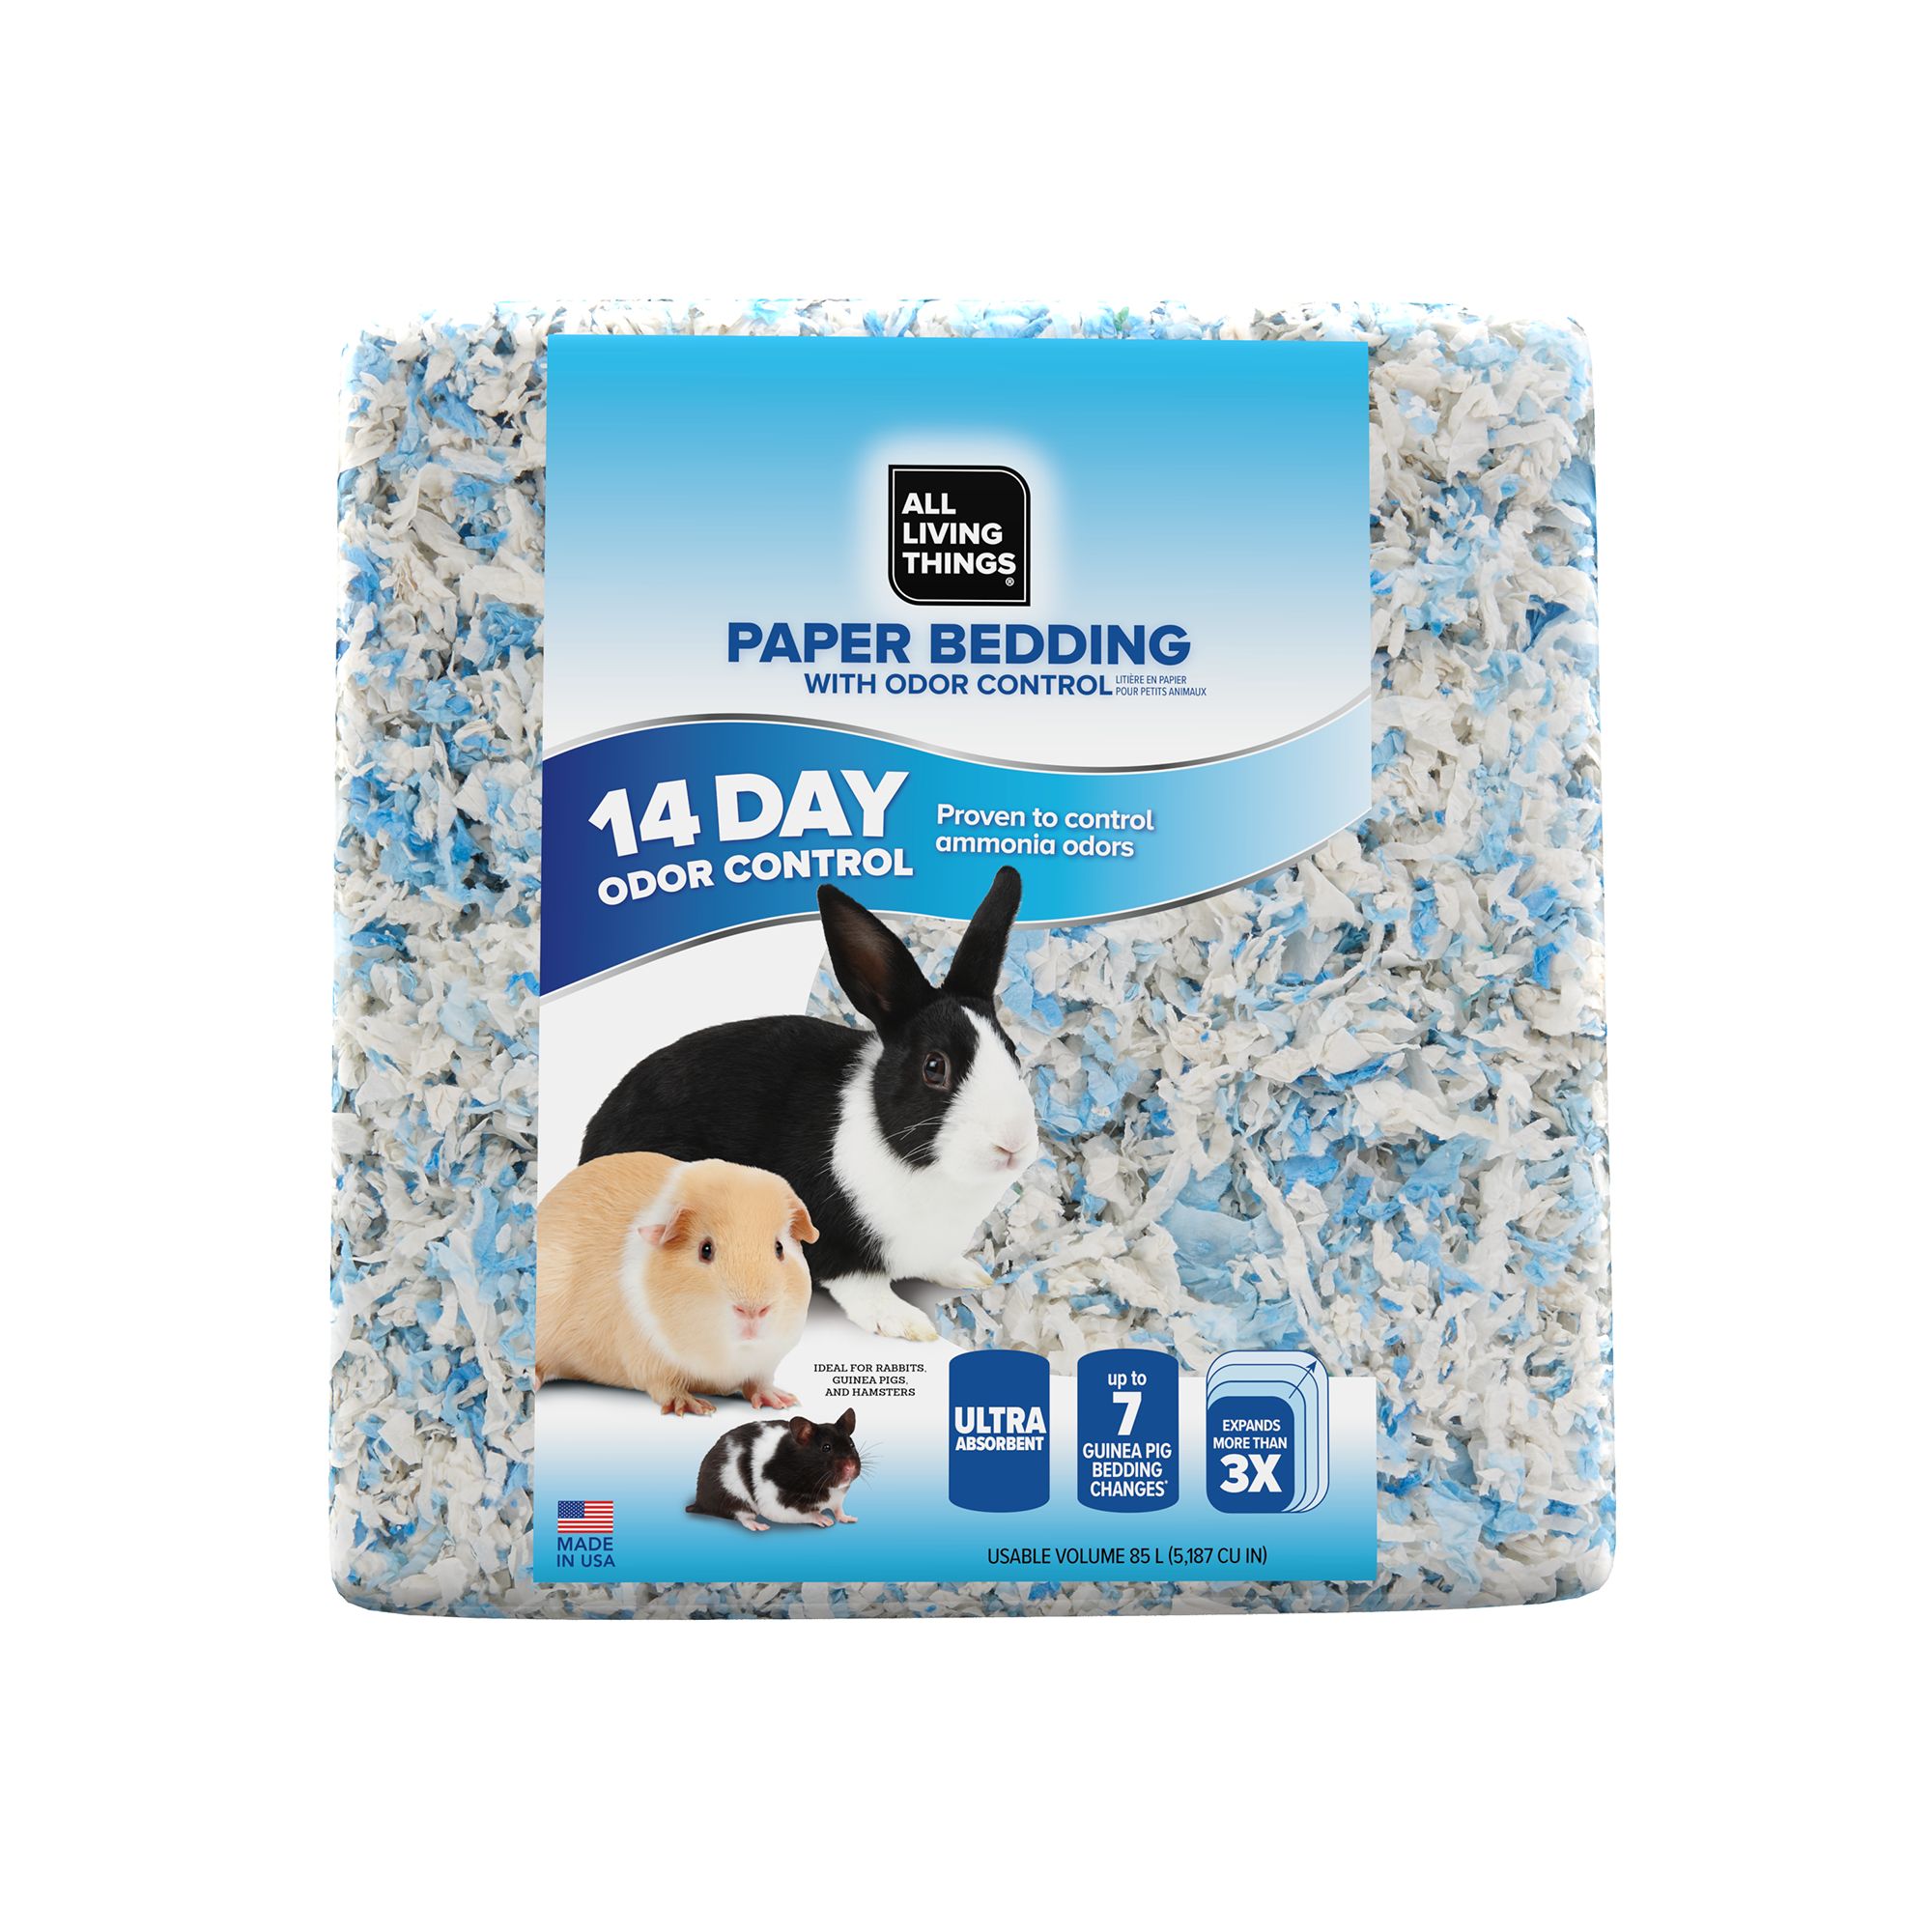 All Living Things® Odor Control Small Pet Paper Bedding - Blue & White